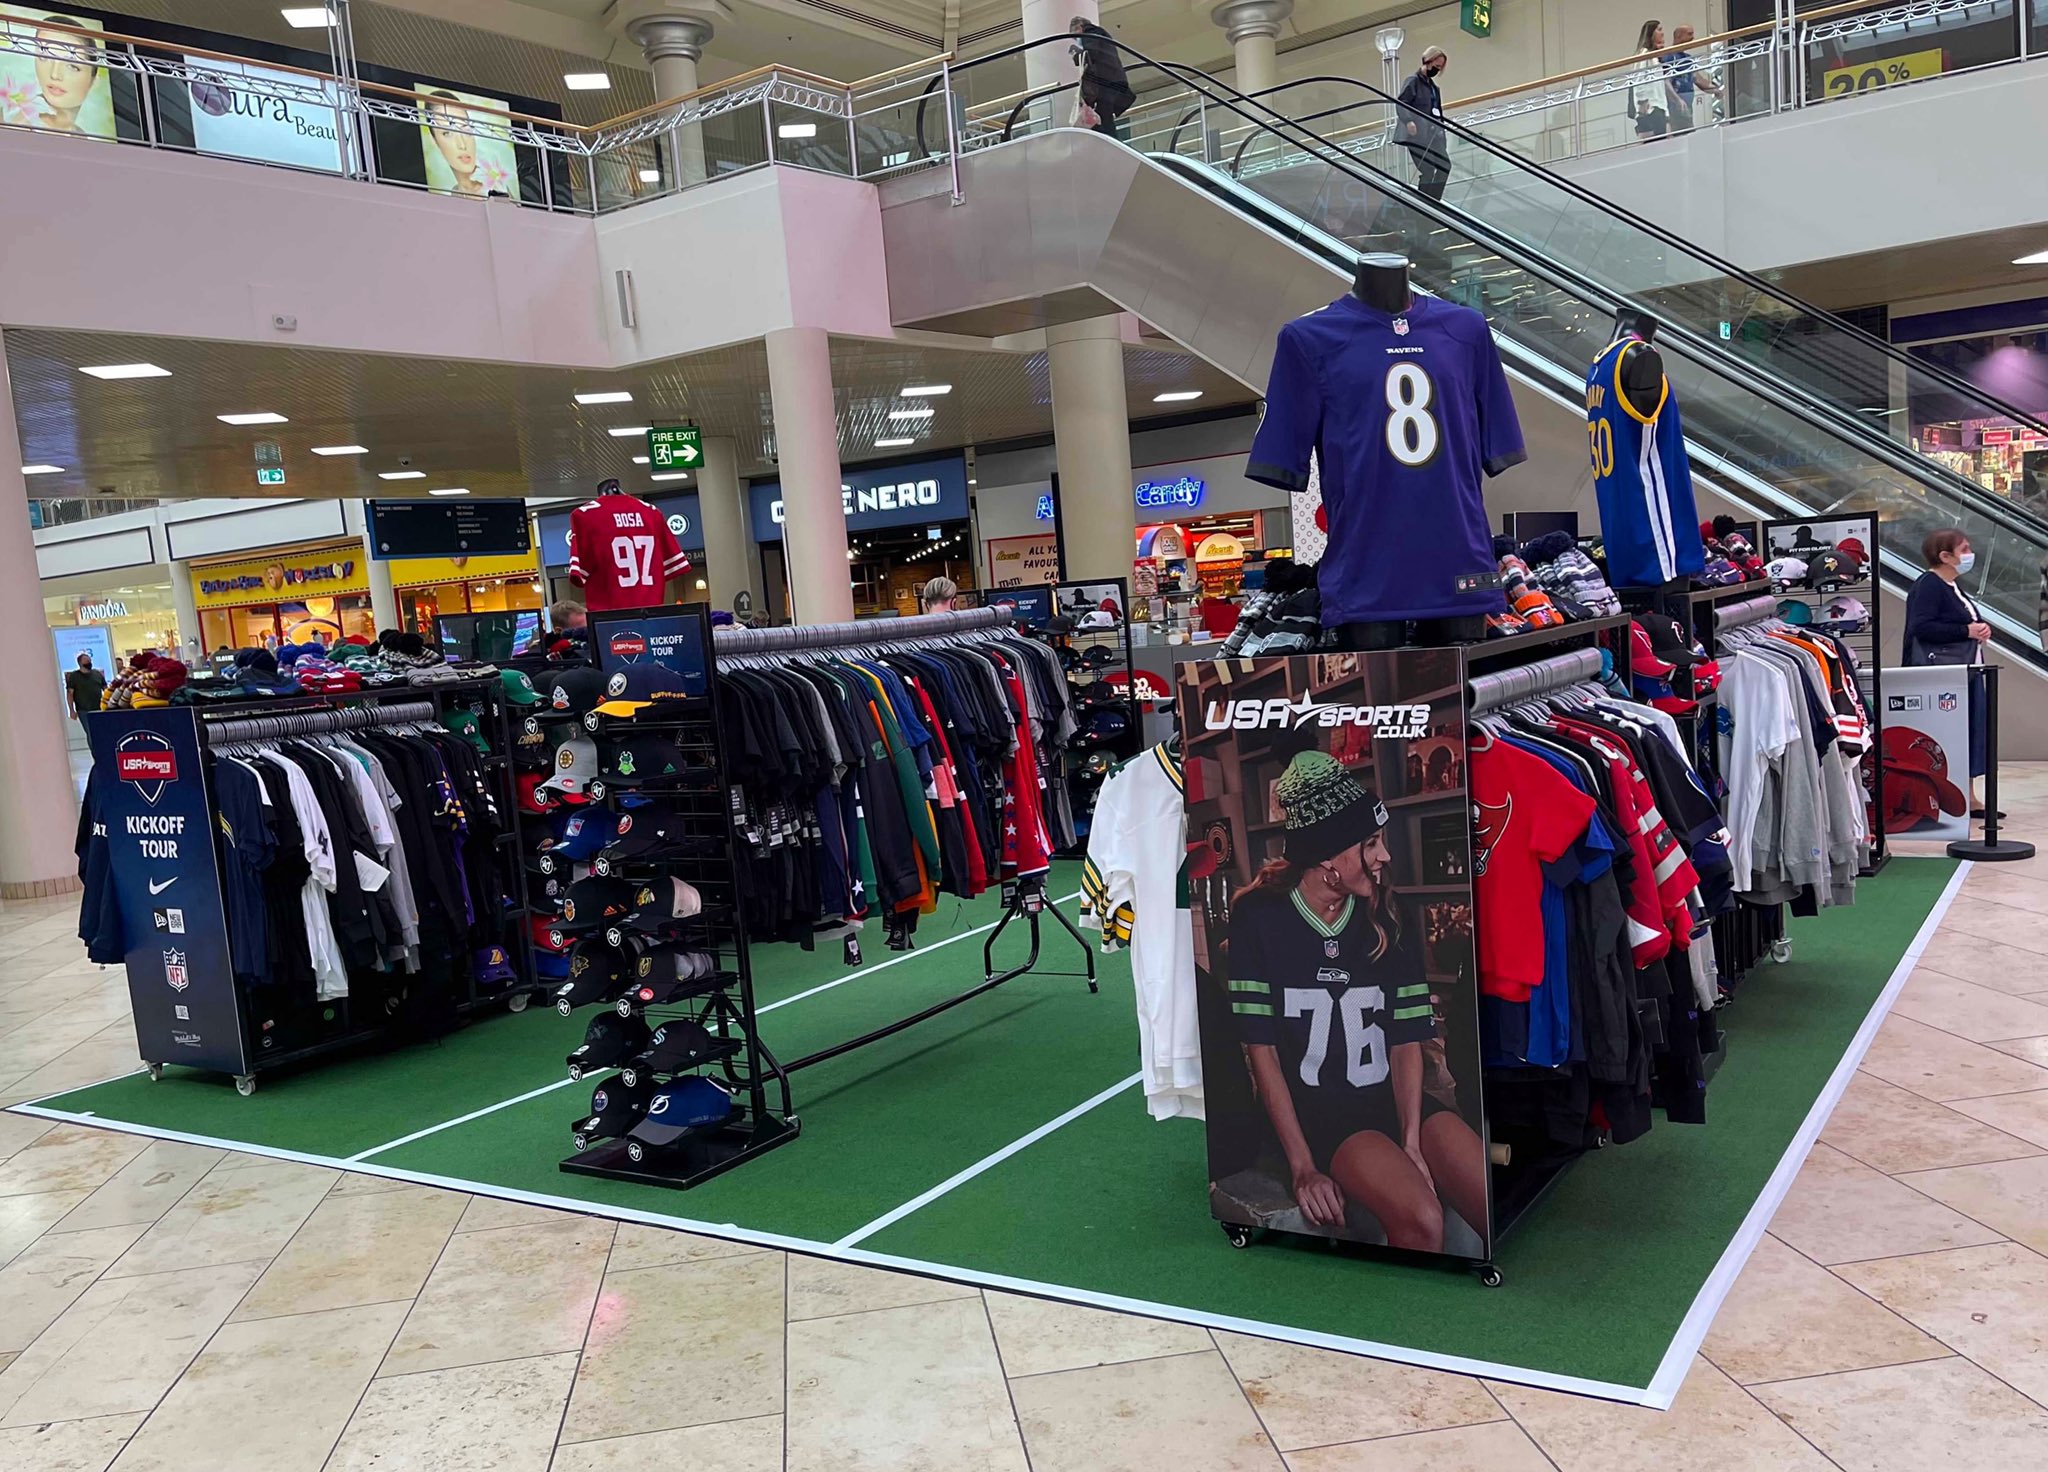 USA Sports on X: 'Our @_Metrocentre , Gateshead Pop-Up store is